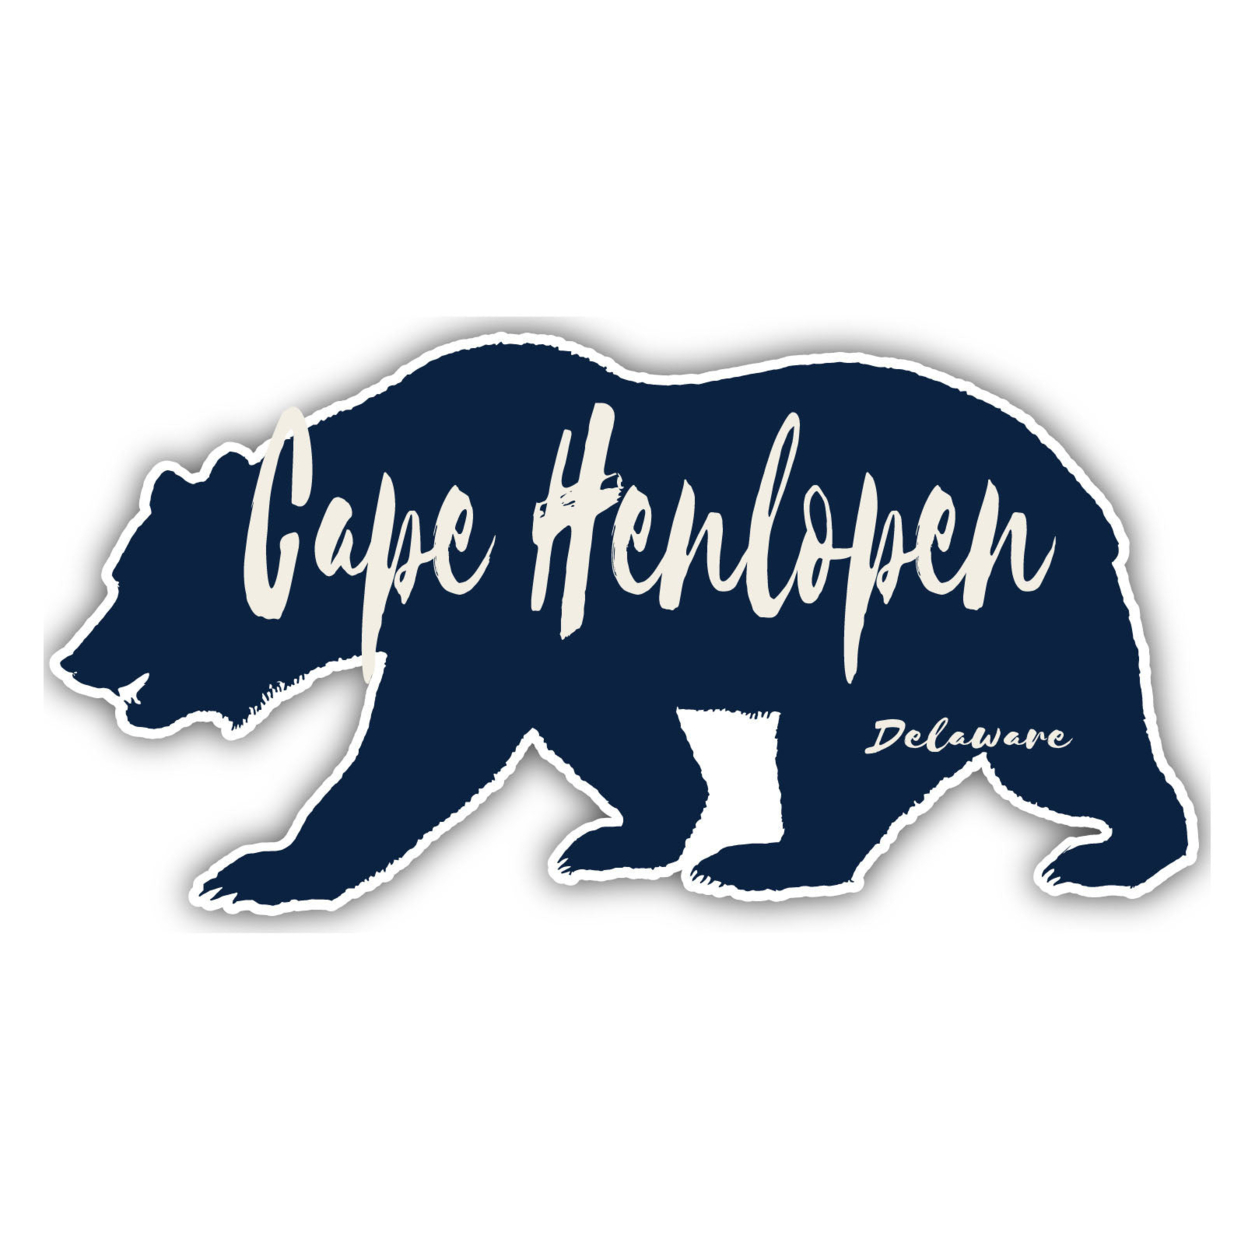 Cape Henlopen Delaware Souvenir Decorative Stickers (Choose Theme And Size) - 4-Pack, 8-Inch, Camp Life